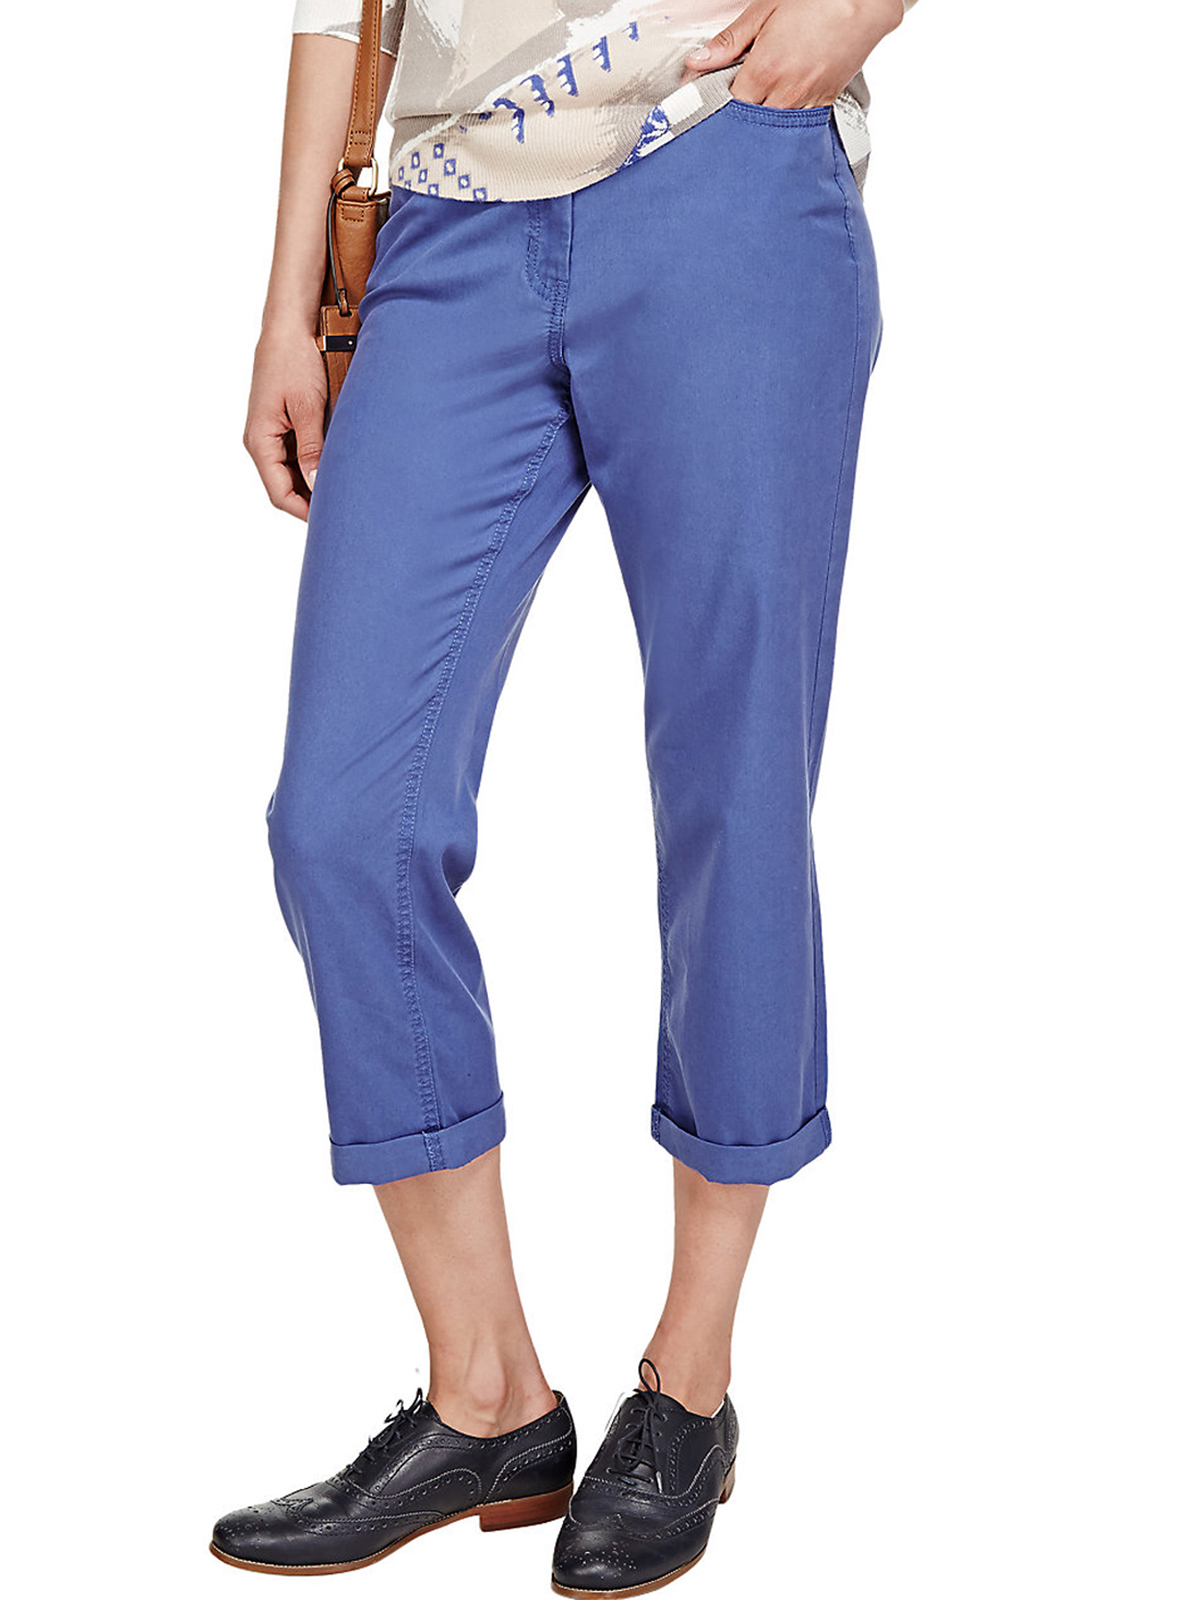 Marks and Spencer - - M&5 BLUE Turn Up Hem Trousers - Size 12 to 18